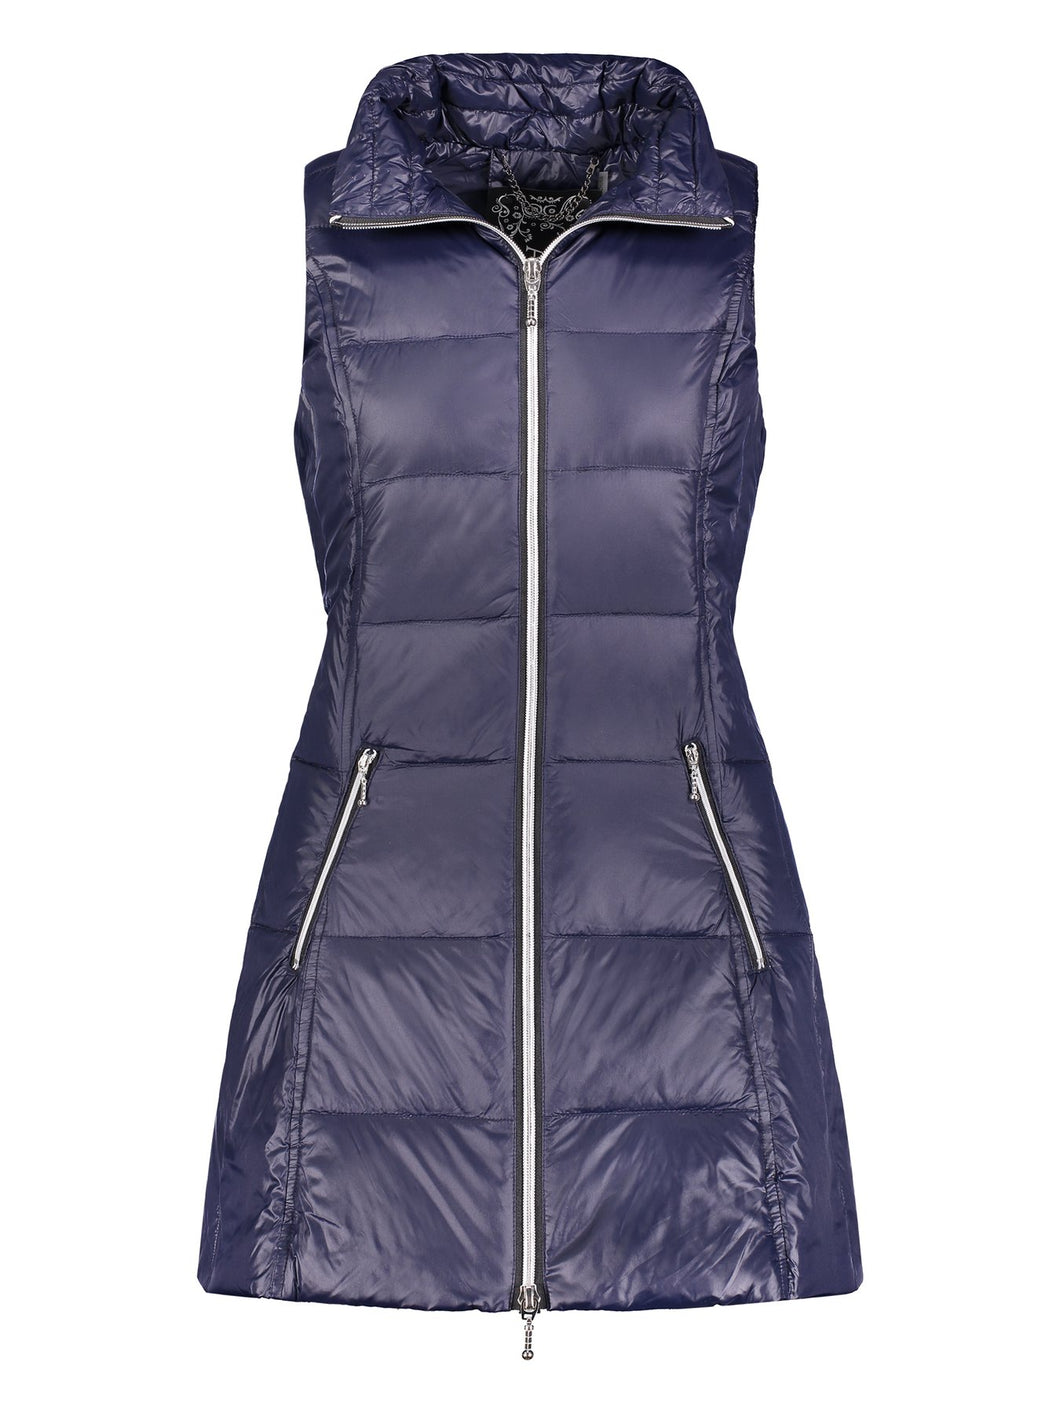 Long Down Filled Puffer Vest in Ink Navy by My Anorak